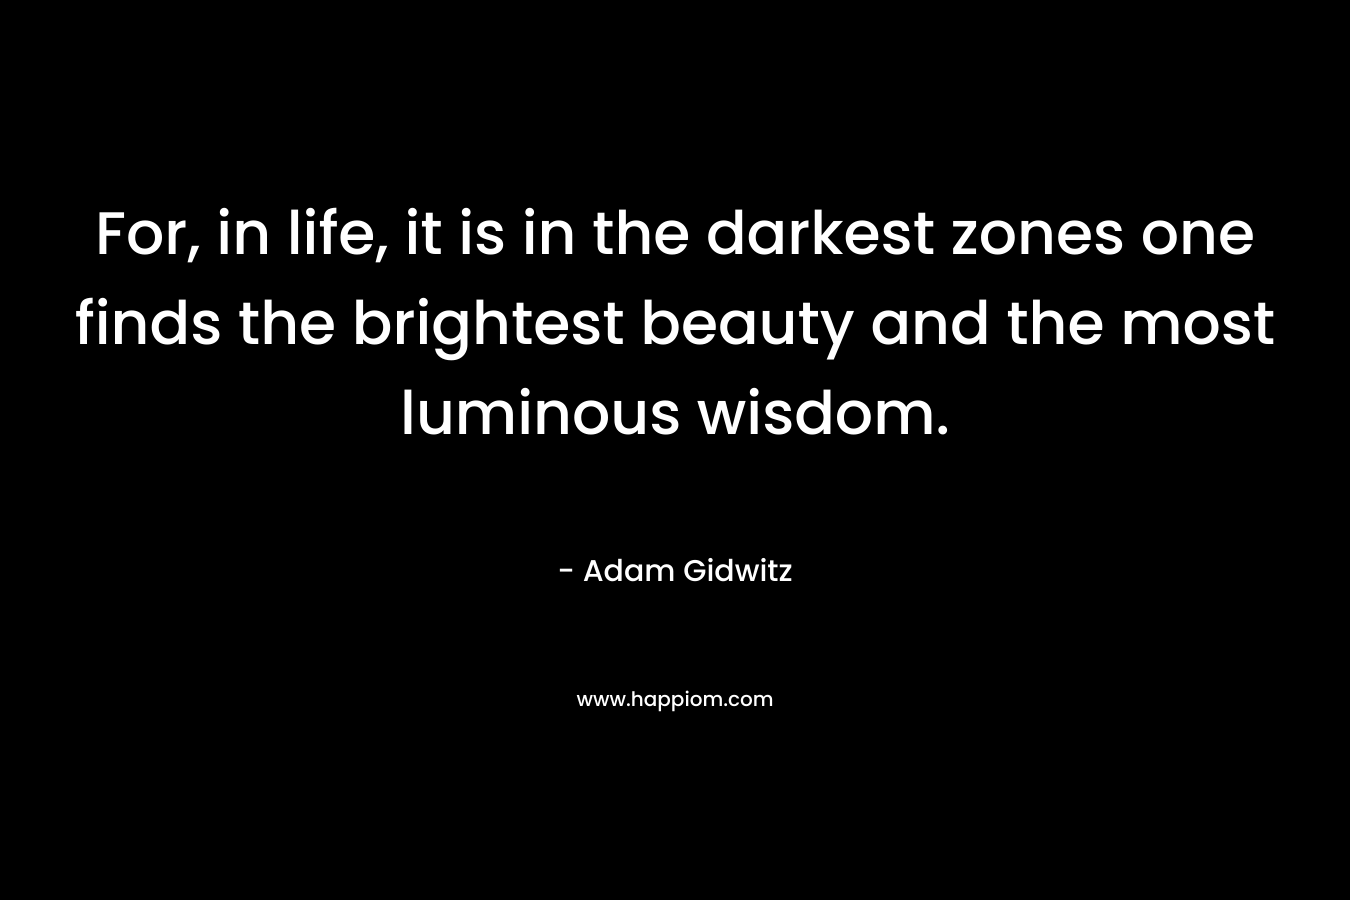 For, in life, it is in the darkest zones one finds the brightest beauty and the most luminous wisdom.